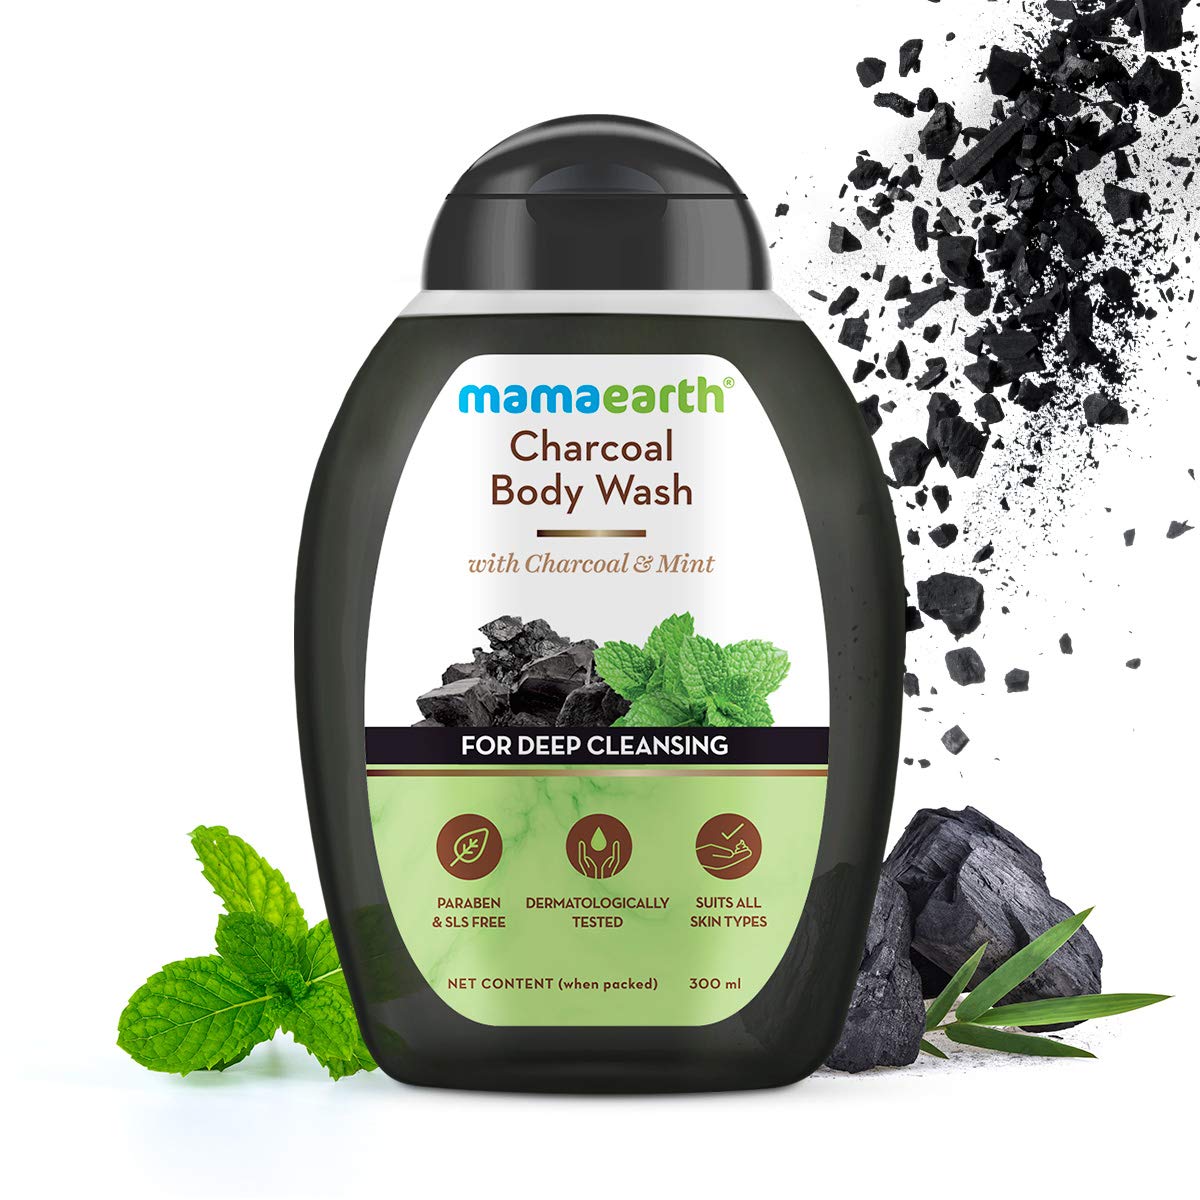 Mamaearth Charcoal Body Wash With Charcoal & Mint For Deep Cleansing (300ml)